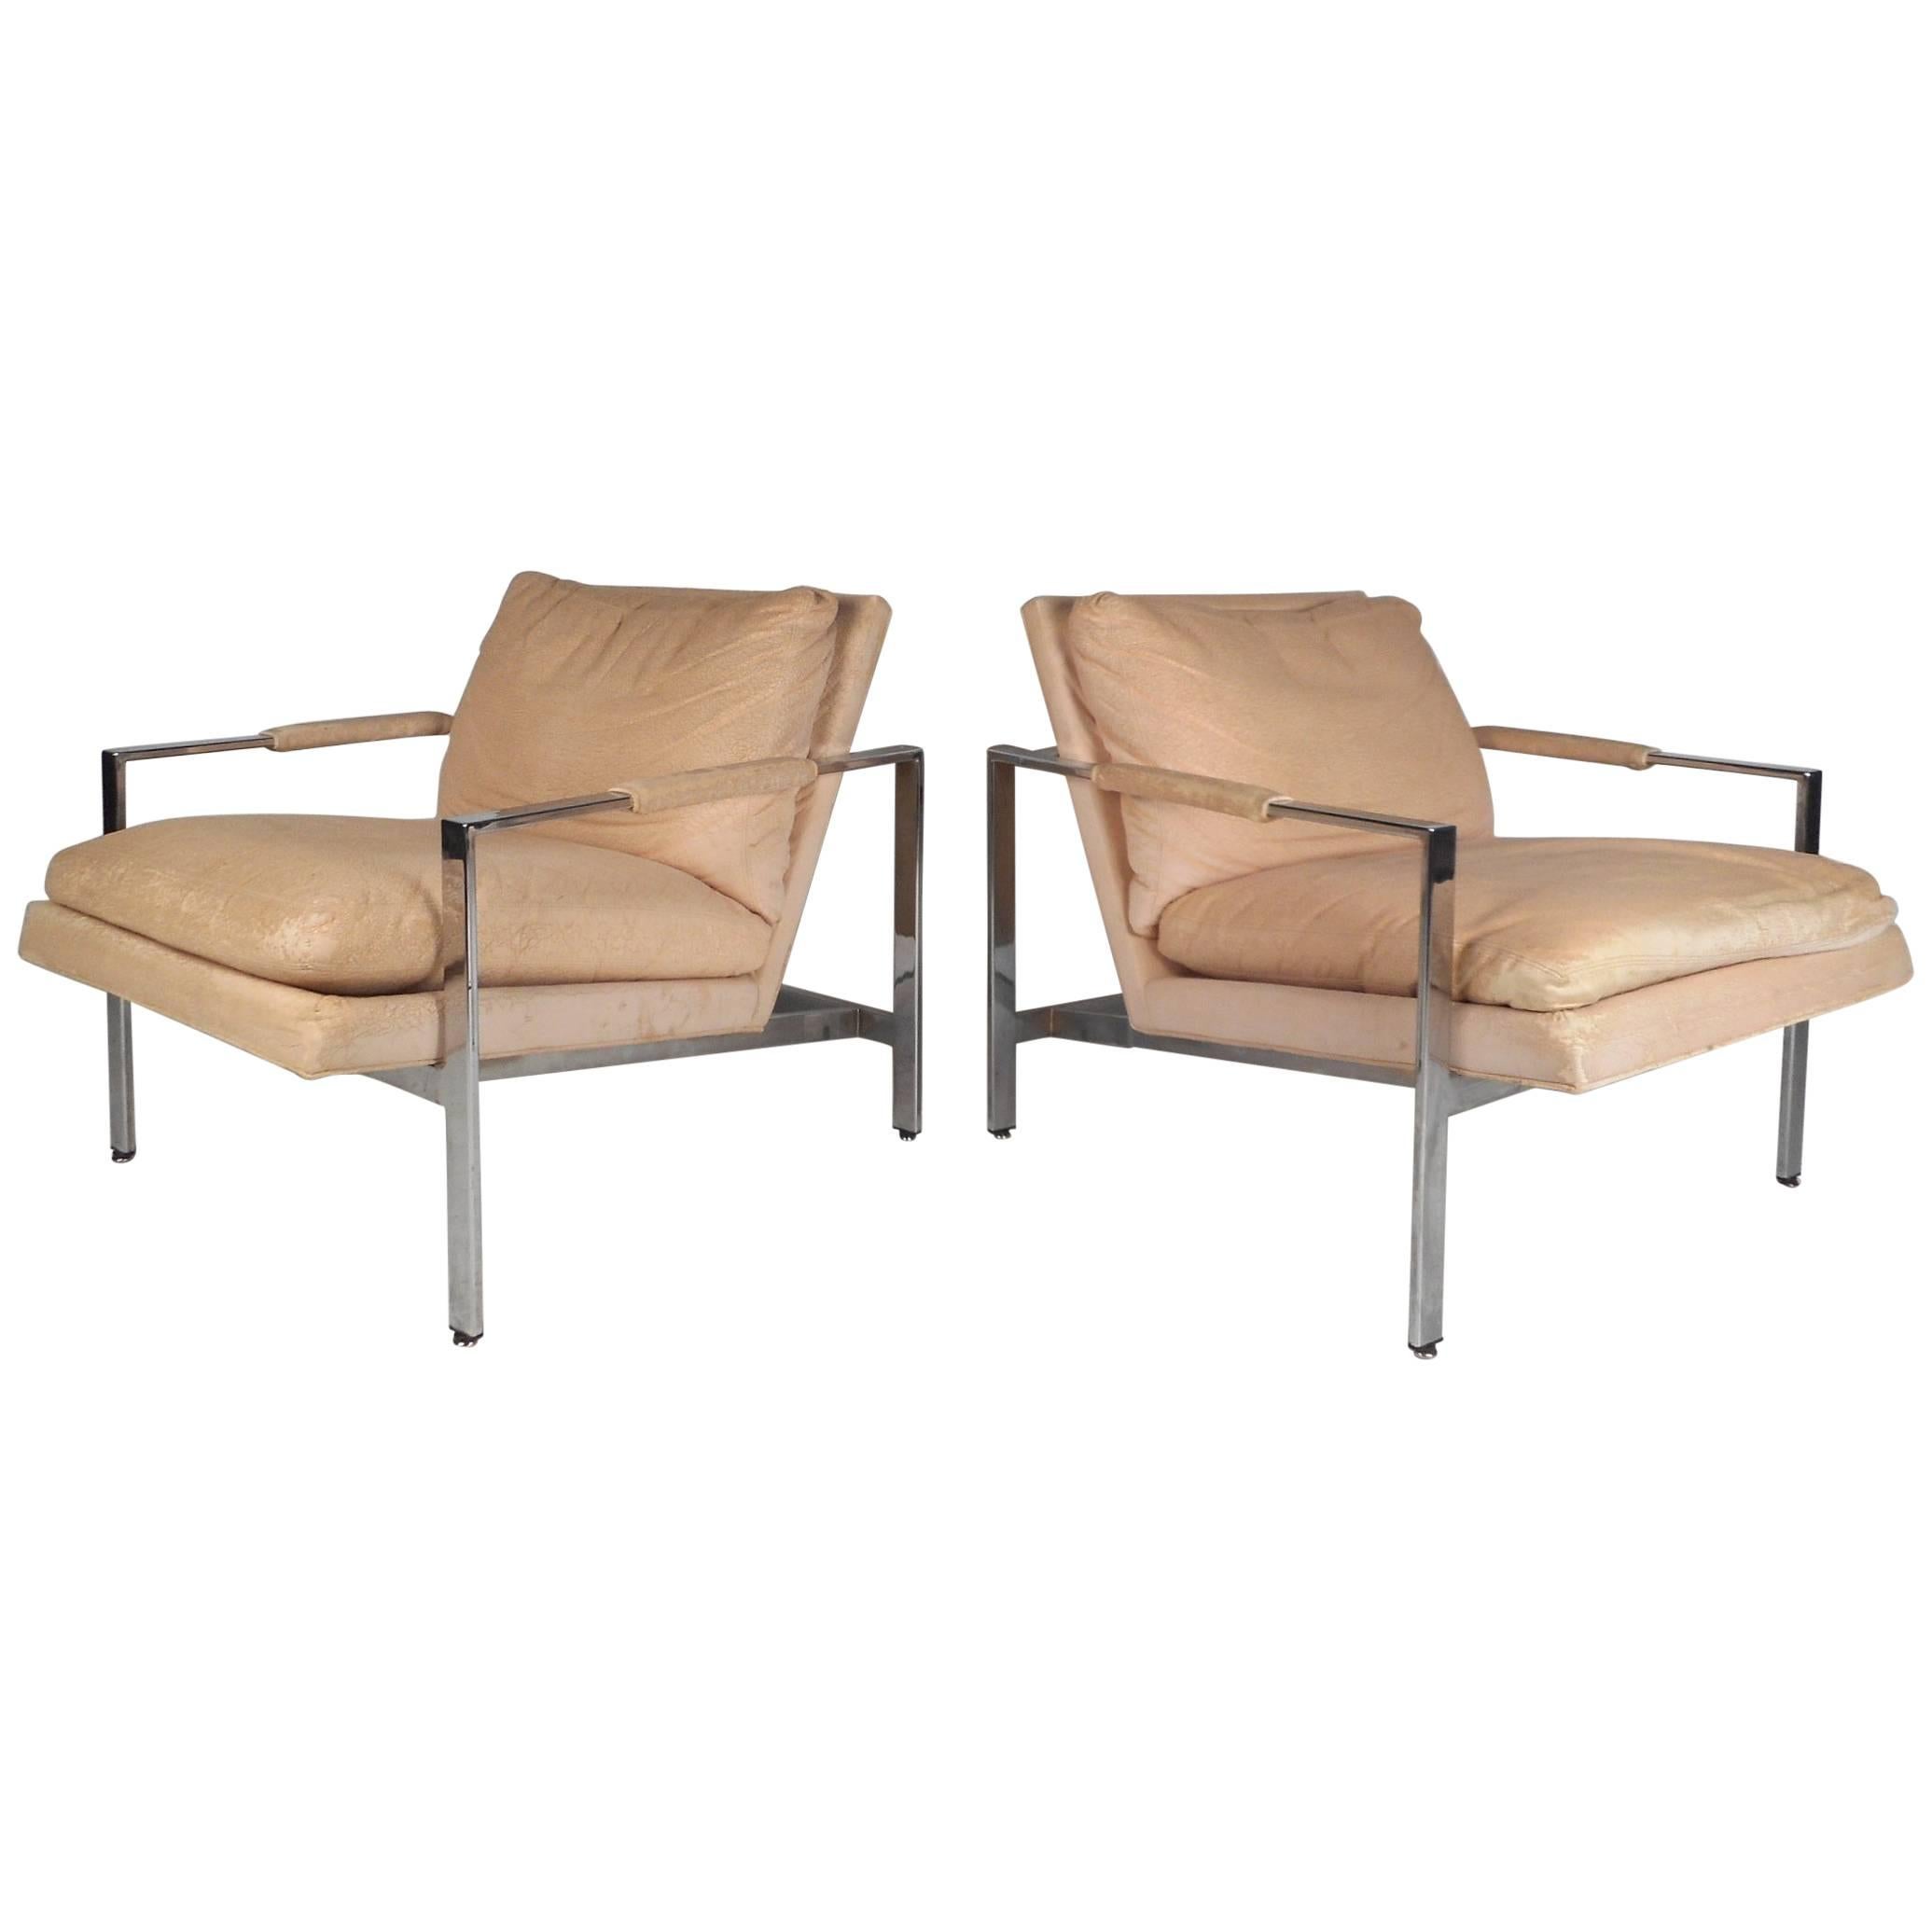 Pair of Flat Bar Chrome Lounge Chairs by Milo Baughman for Thayer Coggin